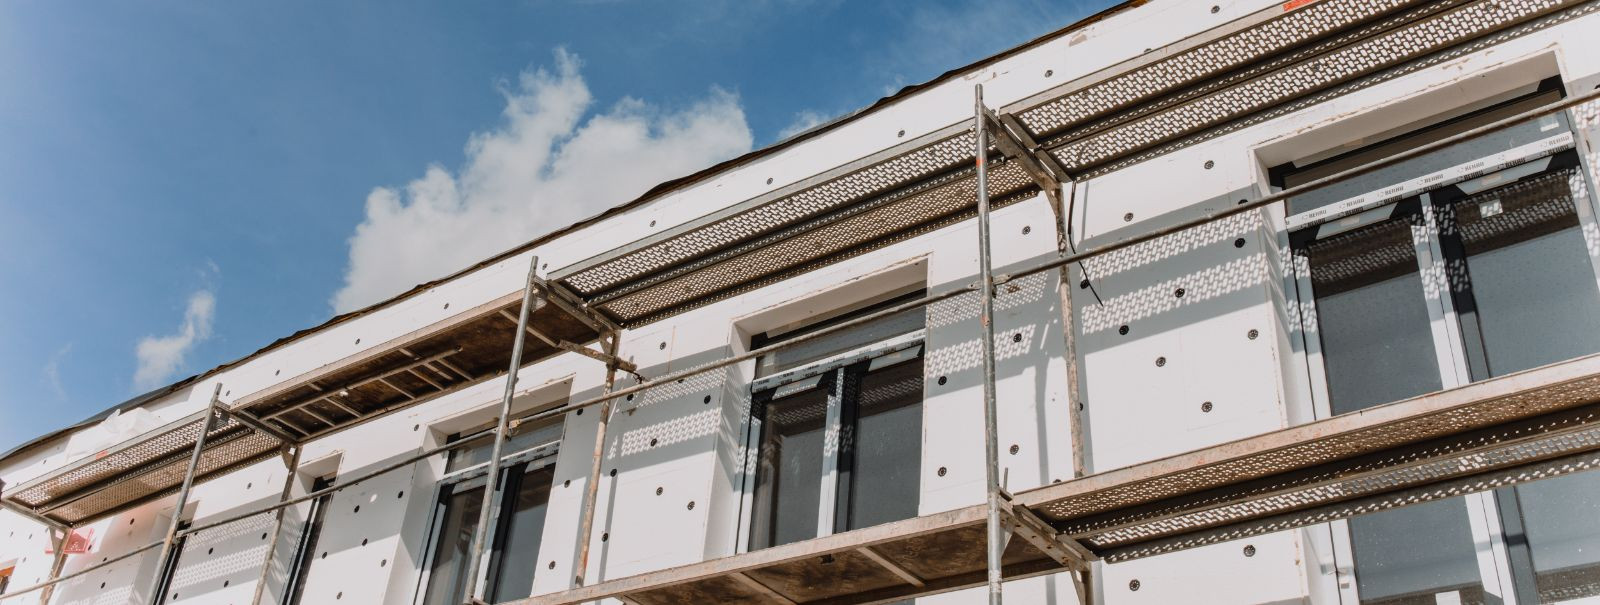 The facade of a property is more than just an exterior wall; it's the face of a home or business, setting the tone for the entire structure. It's the first thin